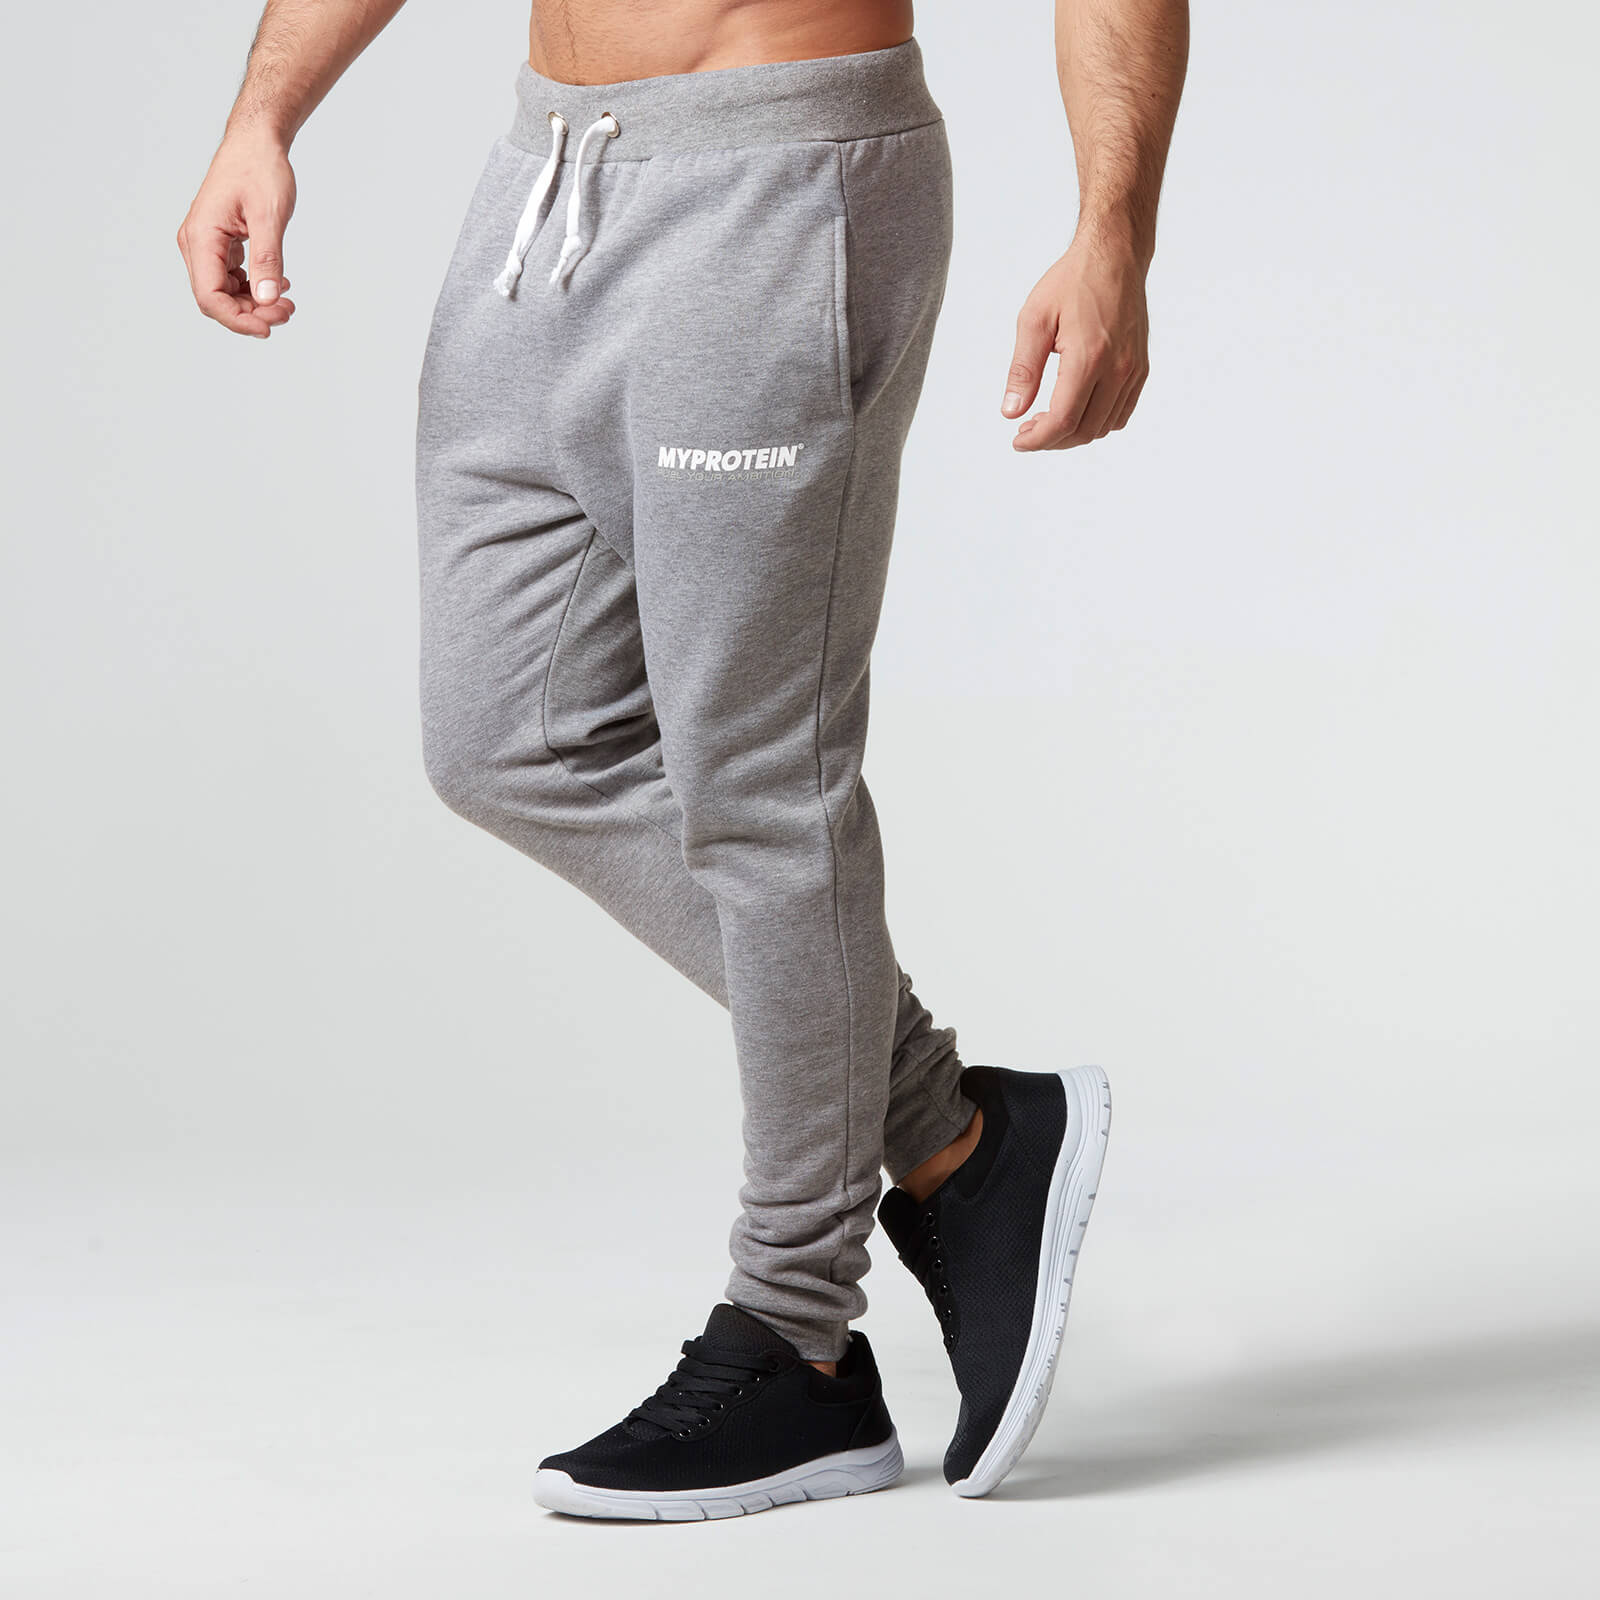 Myprotein Men's Skinny Fit Sweatpants - Charcoal